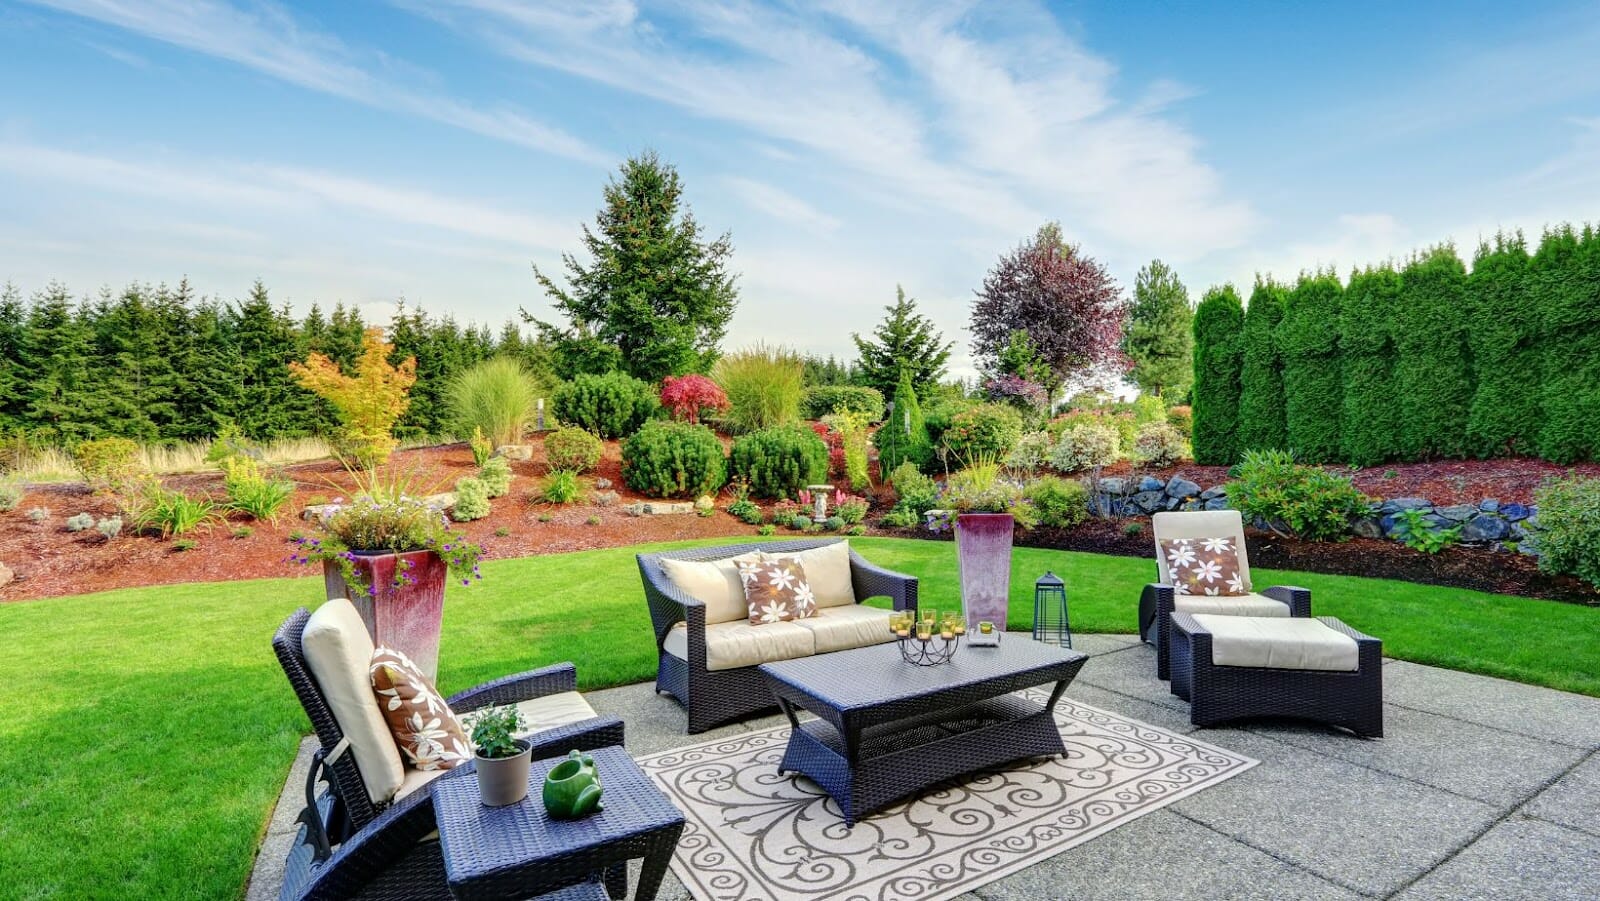 Creating Your Dream Backyard – Ideas For Perfecting Your Home